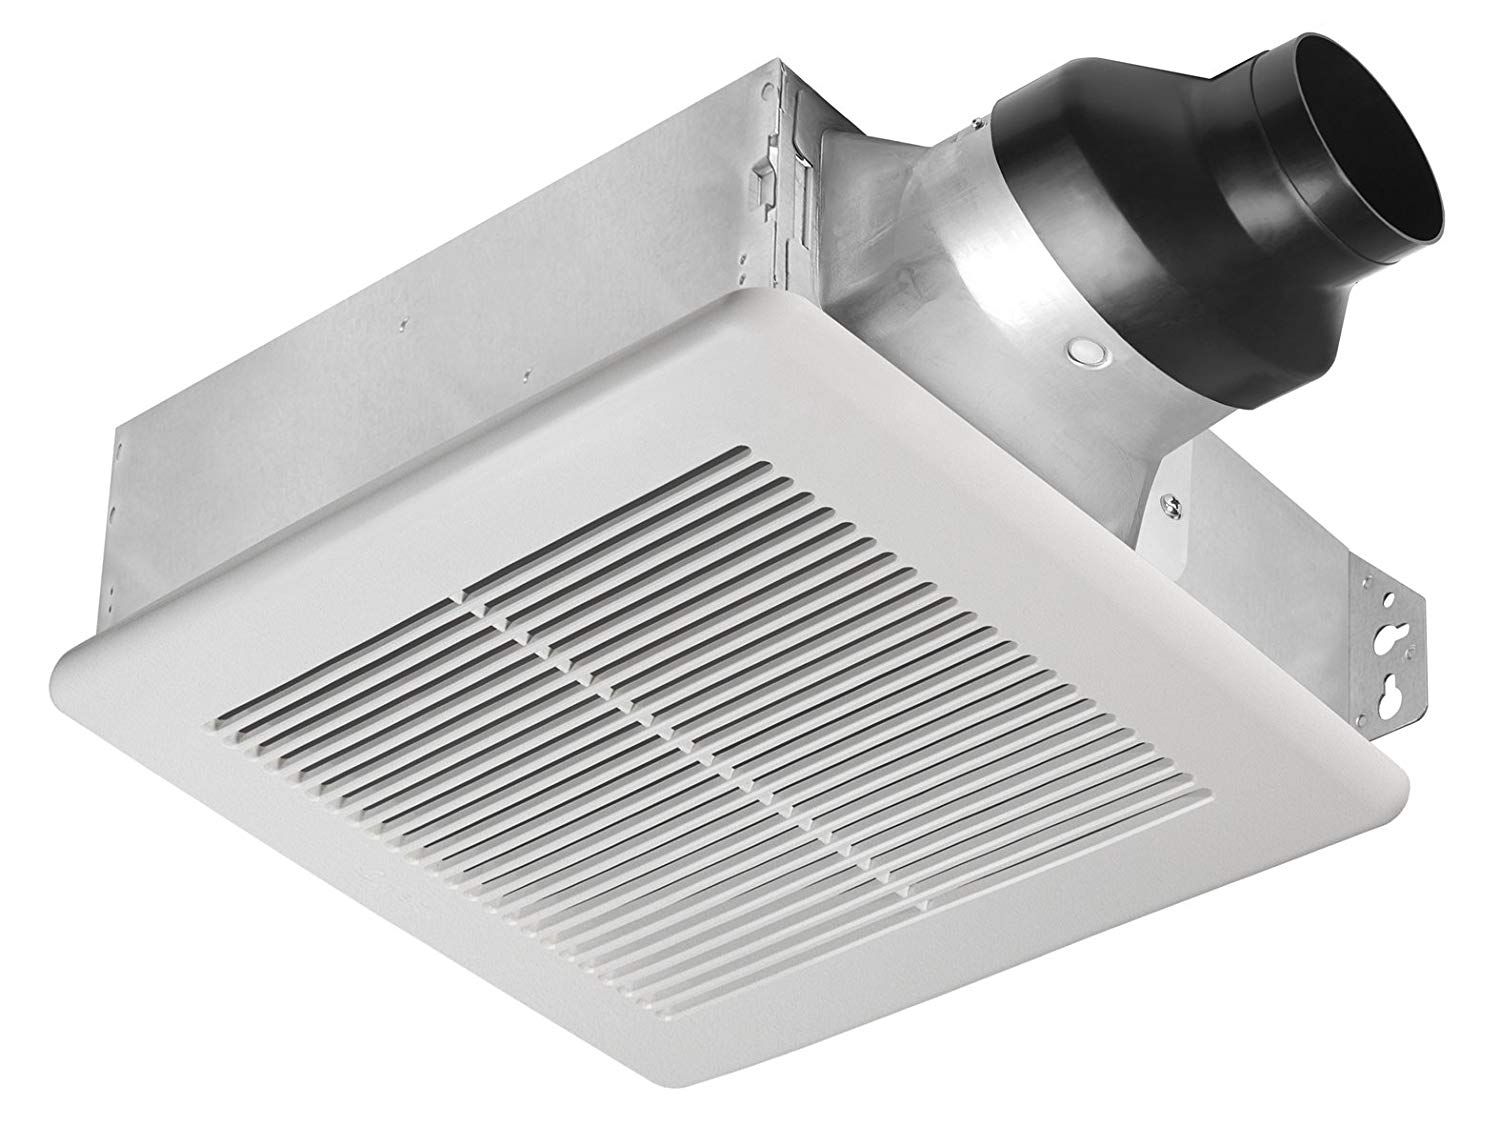 How To Calculate CFM Of An Exhaust Fan